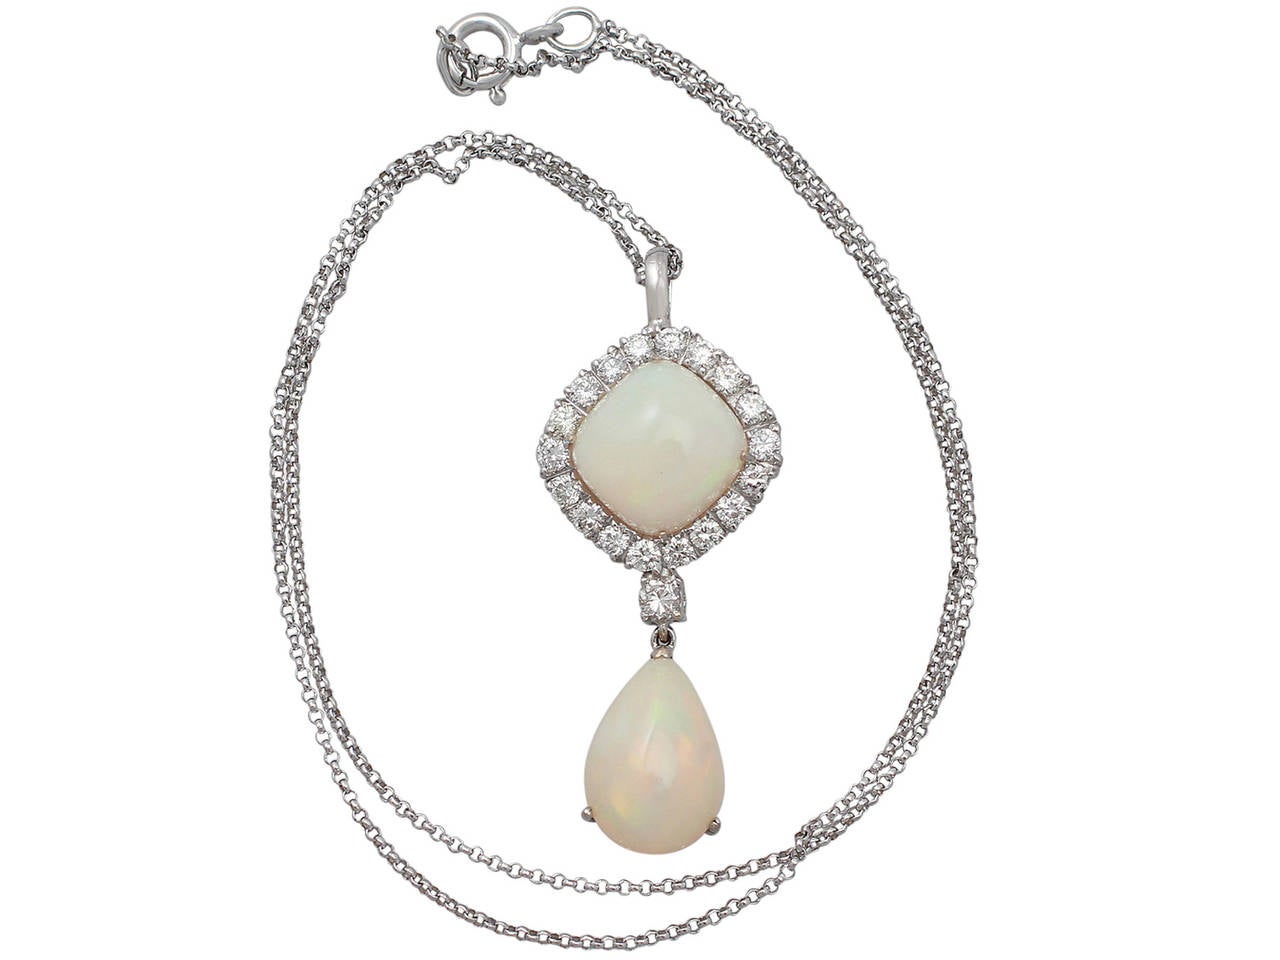 A fine and impressive contemporary natural opal and 1.25 carat diamond, 18 karat white gold pendant; part of our opal and pearl jewelry/jewelry collections

This fine contemporary opal and diamond pendant has been crafted in 18k white gold.

The